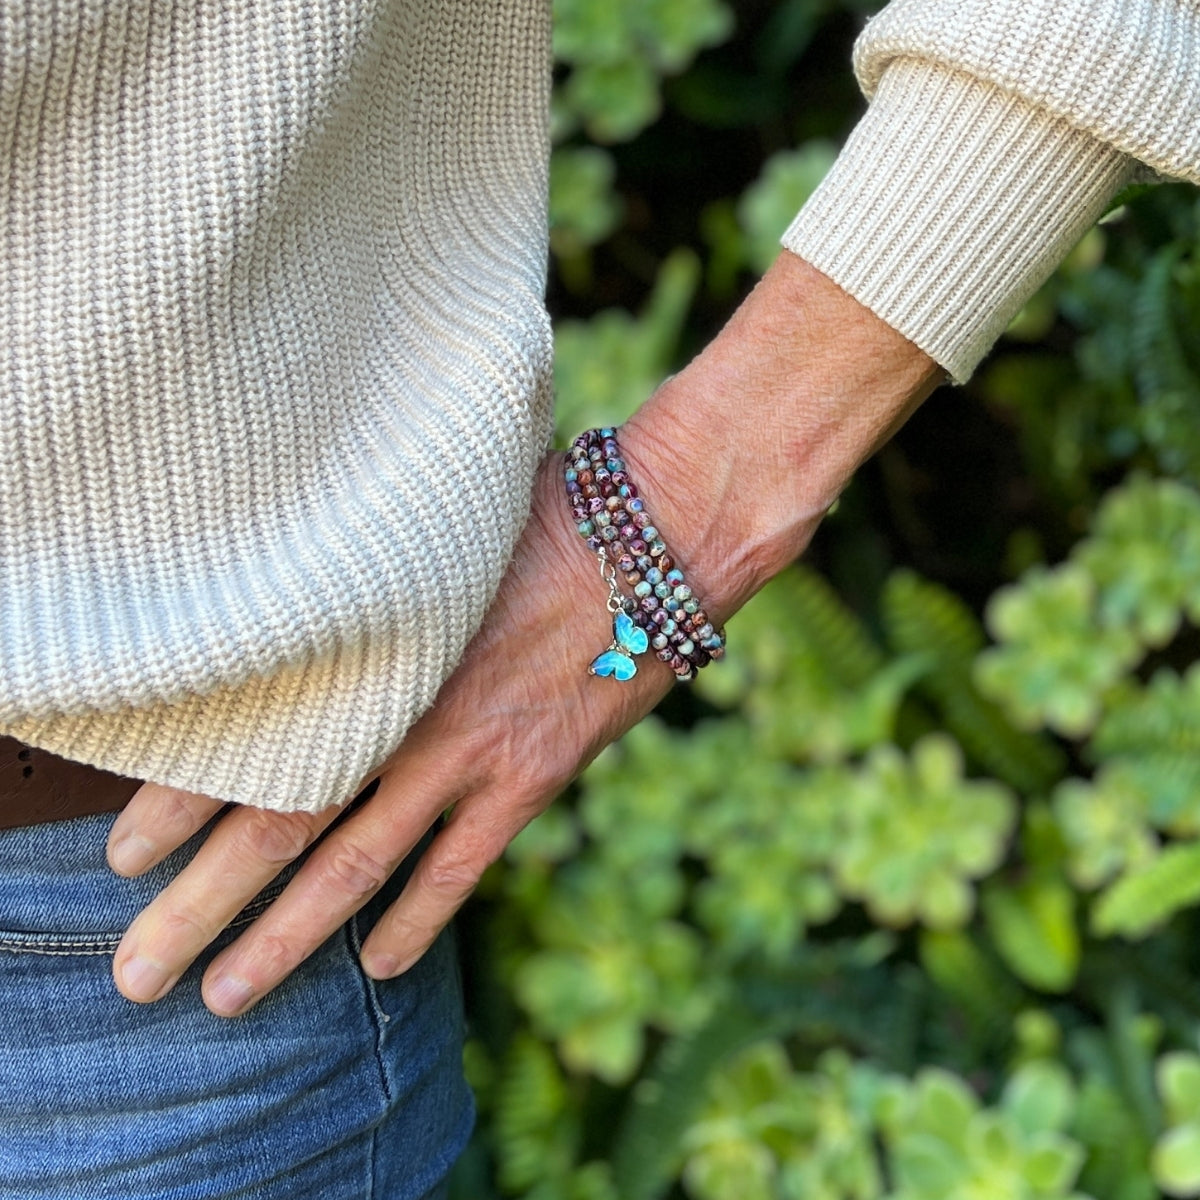 Let the "Joyful Butterfly Dance Wrap Bracelet" be your mindful companions, encouraging you to dance through life with the carefree spirit of a butterfly.